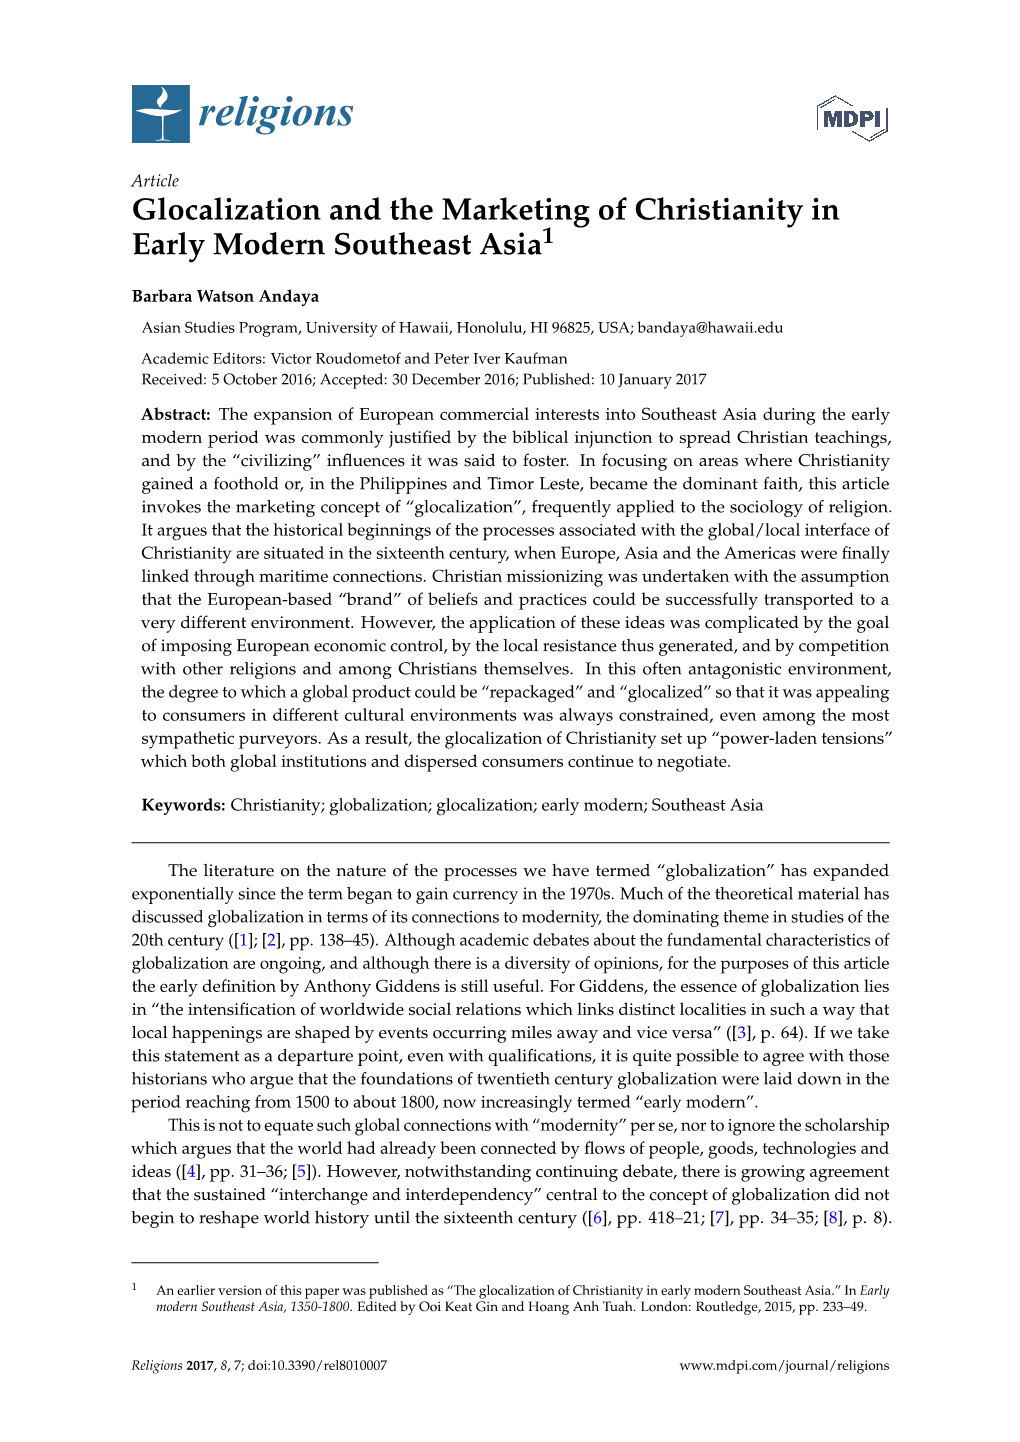 Glocalization and the Marketing of Christianity in Early Modern Southeast Asia1